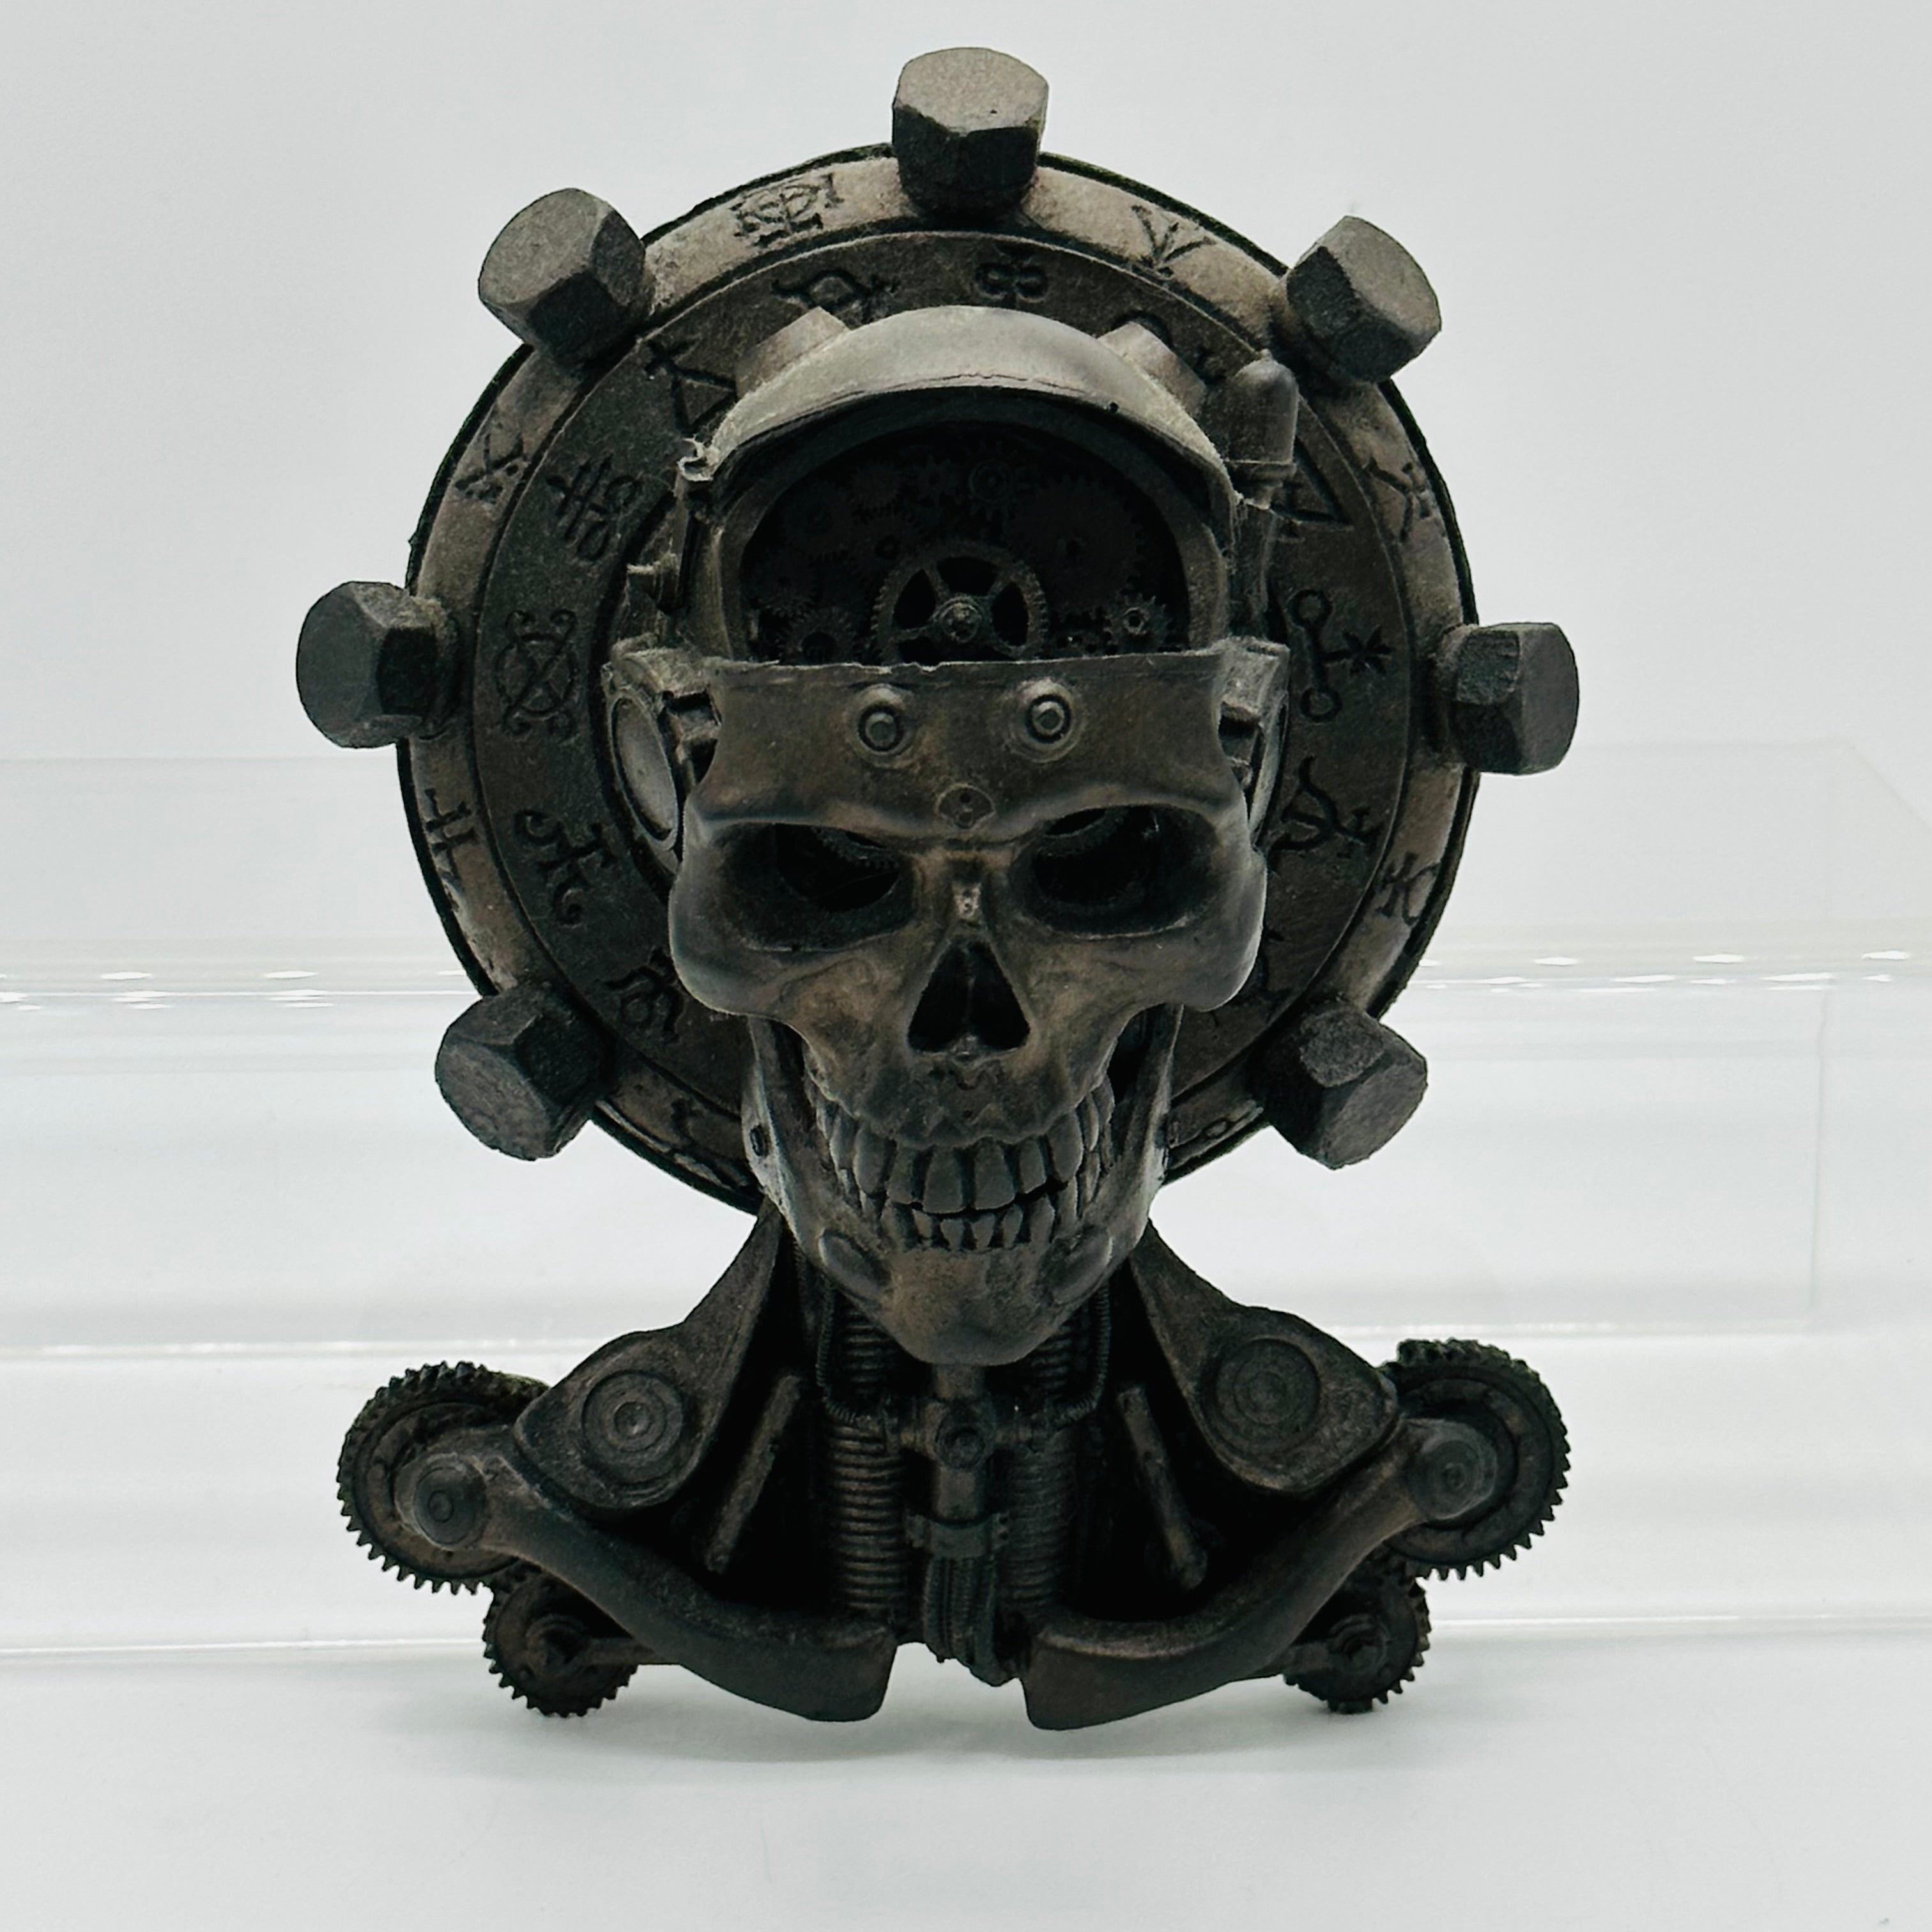 Bio-Mechanical Wall Bust 6” Inches